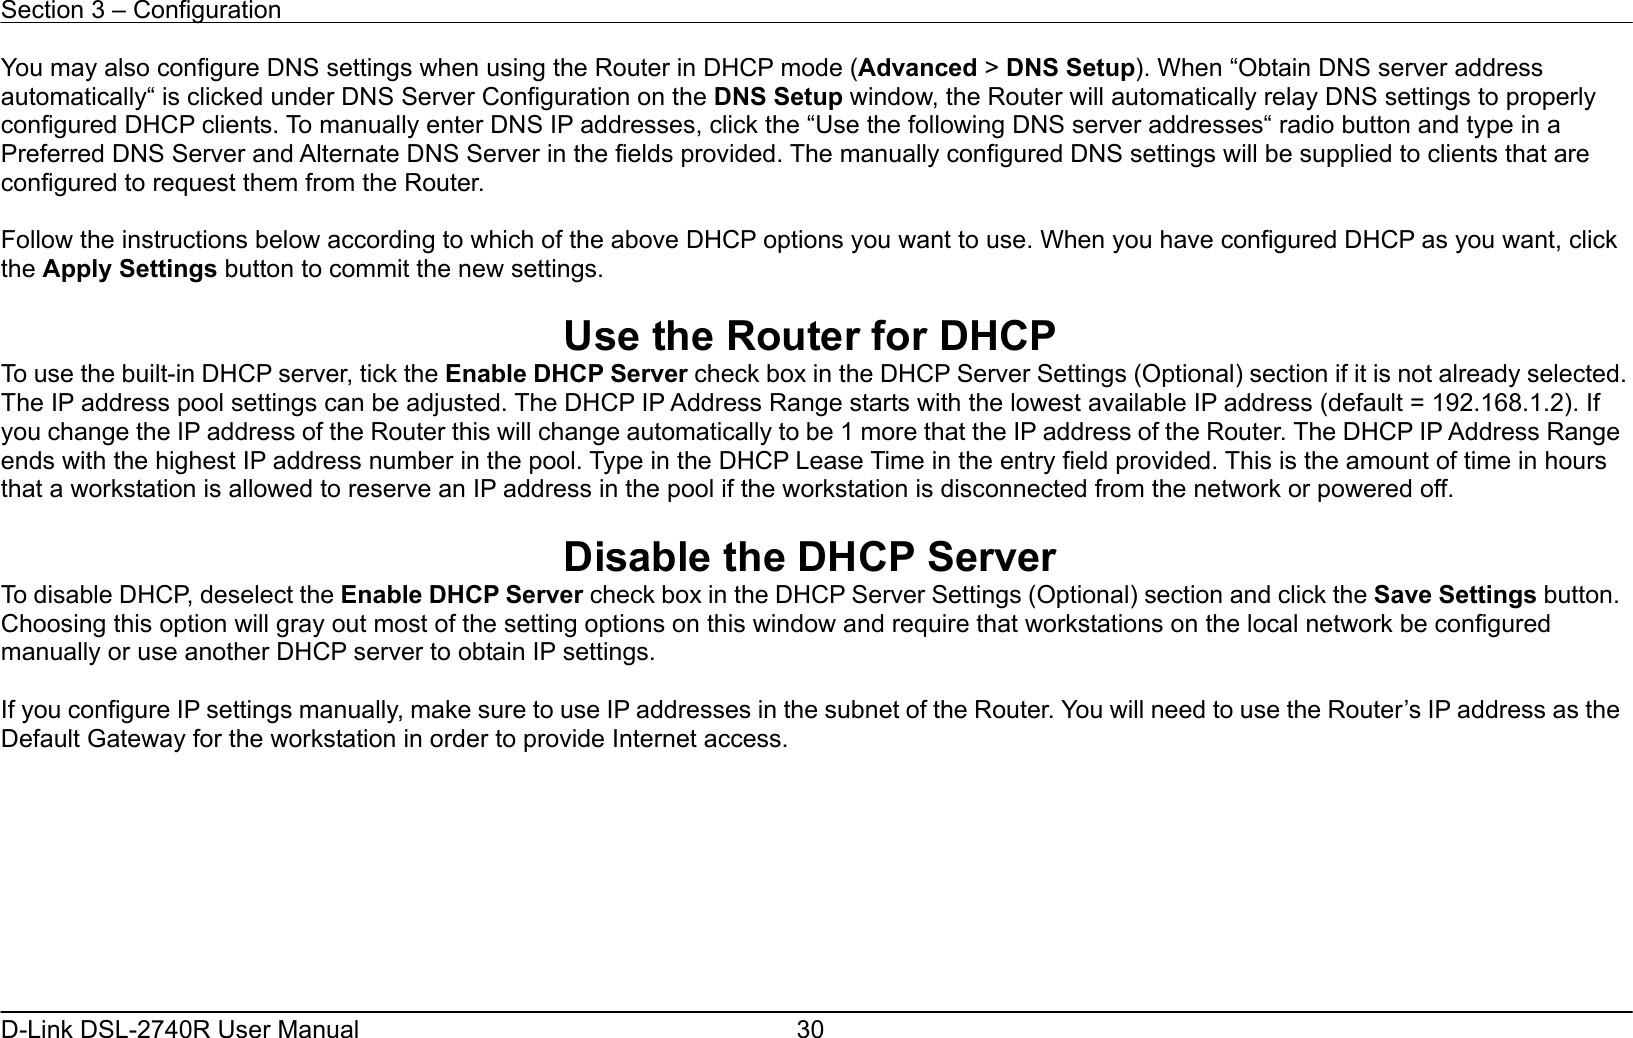 Section 3 – Configuration   D-Link DSL-2740R User Manual  30You may also configure DNS settings when using the Router in DHCP mode (Advanced &gt; DNS Setup). When “Obtain DNS server address automatically“ is clicked under DNS Server Configuration on the DNS Setup window, the Router will automatically relay DNS settings to properly configured DHCP clients. To manually enter DNS IP addresses, click the “Use the following DNS server addresses“ radio button and type in a Preferred DNS Server and Alternate DNS Server in the fields provided. The manually configured DNS settings will be supplied to clients that are configured to request them from the Router.  Follow the instructions below according to which of the above DHCP options you want to use. When you have configured DHCP as you want, click the Apply Settings button to commit the new settings.  Use the Router for DHCP To use the built-in DHCP server, tick the Enable DHCP Server check box in the DHCP Server Settings (Optional) section if it is not already selected. The IP address pool settings can be adjusted. The DHCP IP Address Range starts with the lowest available IP address (default = 192.168.1.2). If you change the IP address of the Router this will change automatically to be 1 more that the IP address of the Router. The DHCP IP Address Range ends with the highest IP address number in the pool. Type in the DHCP Lease Time in the entry field provided. This is the amount of time in hours that a workstation is allowed to reserve an IP address in the pool if the workstation is disconnected from the network or powered off.  Disable the DHCP Server To disable DHCP, deselect the Enable DHCP Server check box in the DHCP Server Settings (Optional) section and click the Save Settings button. Choosing this option will gray out most of the setting options on this window and require that workstations on the local network be configured manually or use another DHCP server to obtain IP settings.    If you configure IP settings manually, make sure to use IP addresses in the subnet of the Router. You will need to use the Router’s IP address as the Default Gateway for the workstation in order to provide Internet access.         